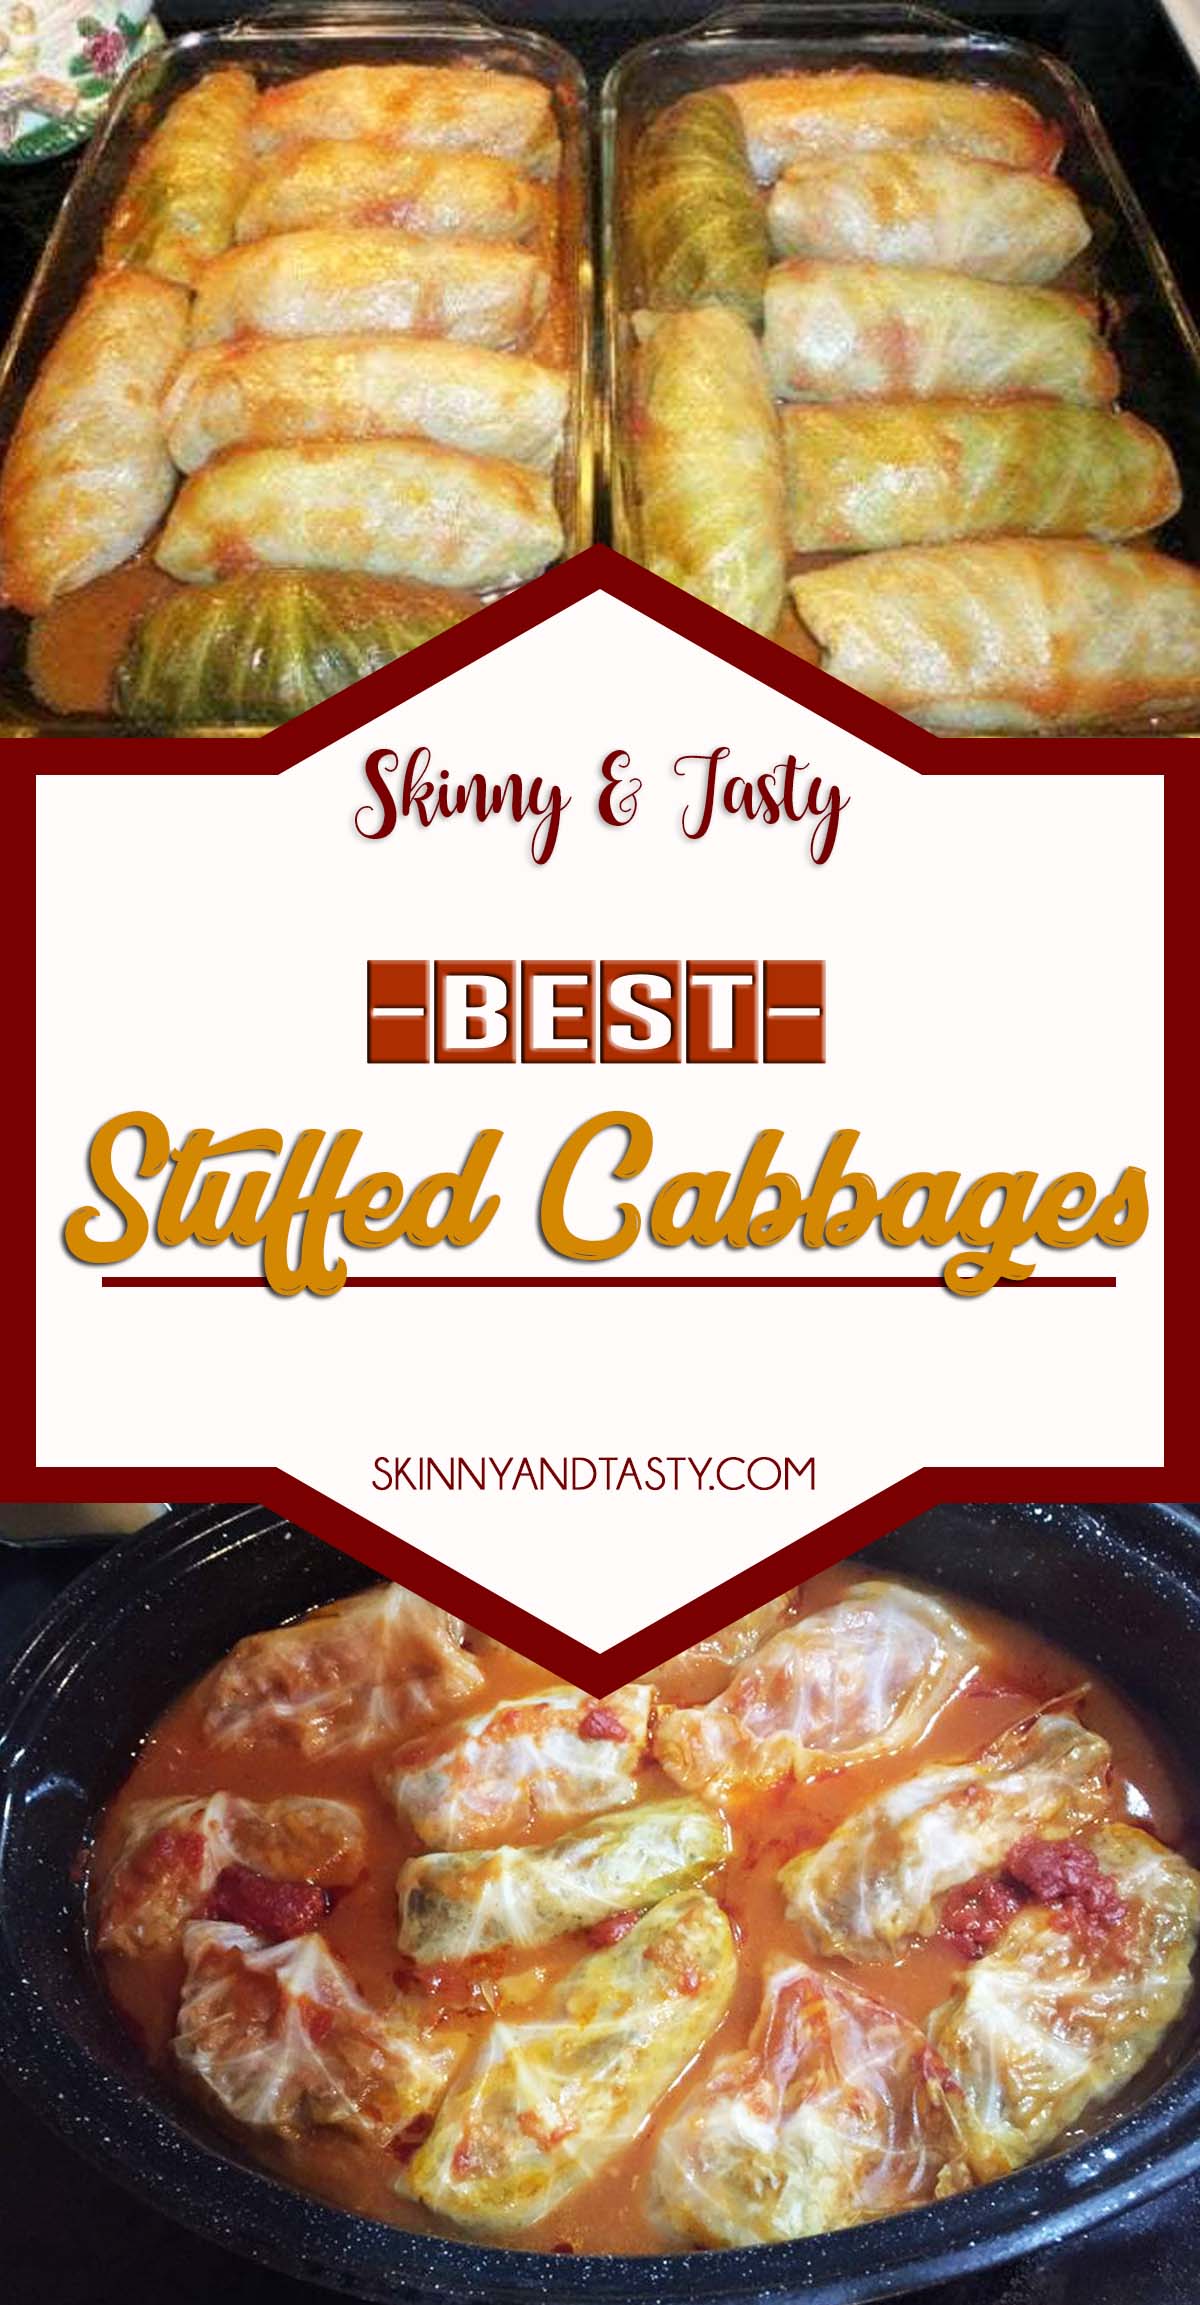 Stuffed Cabbages Recipe